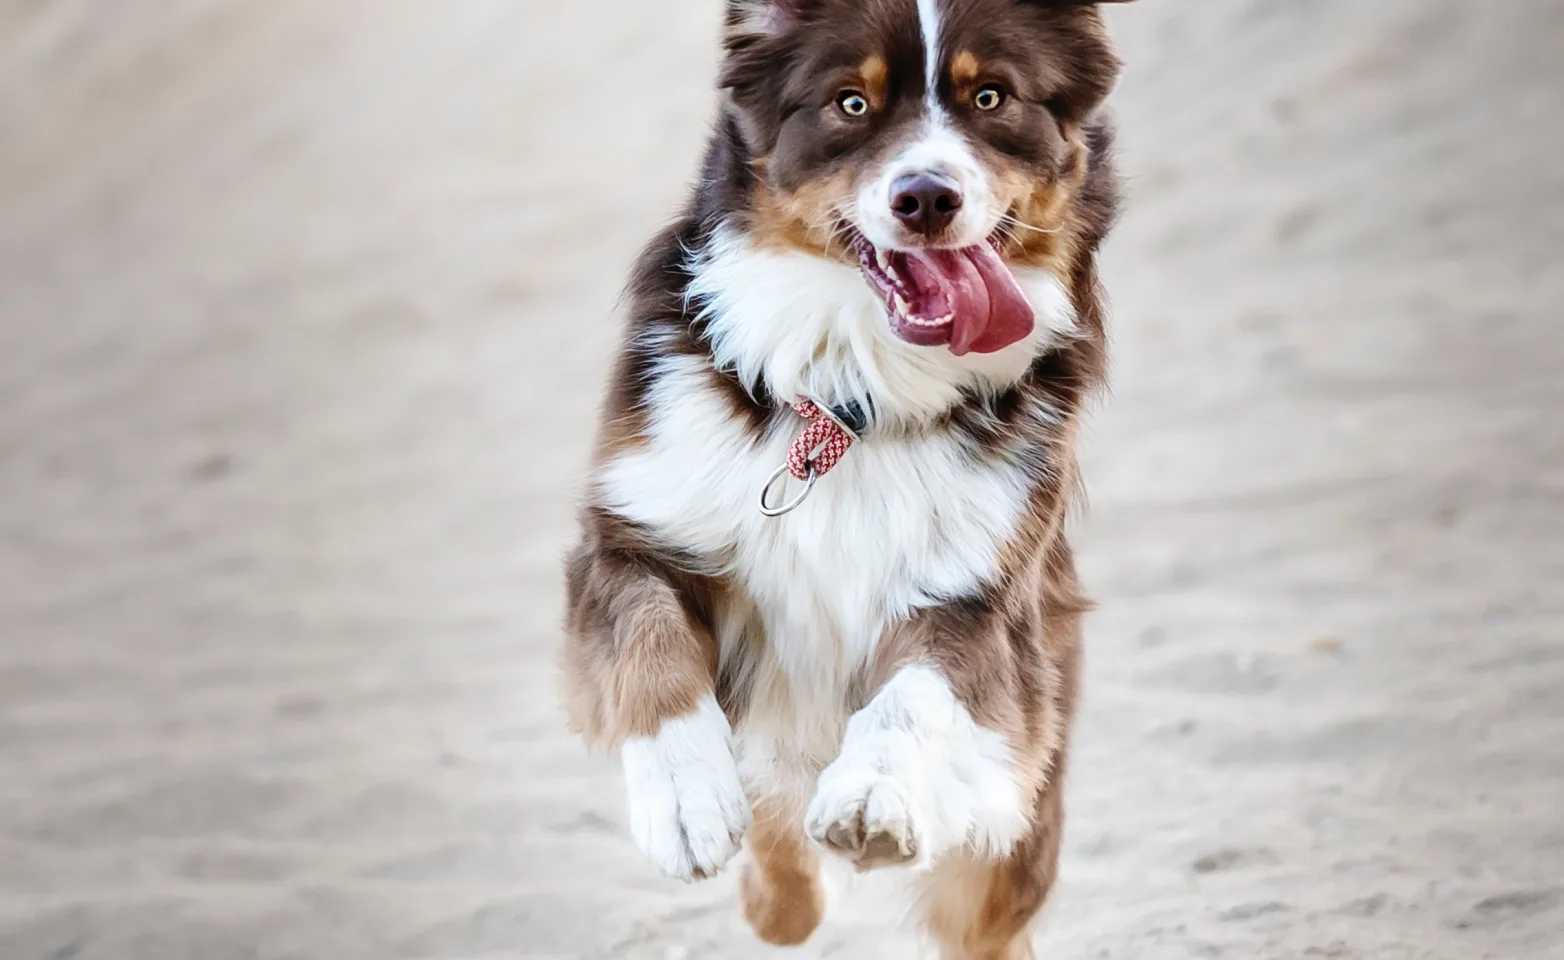 dog with tongue out running in sand